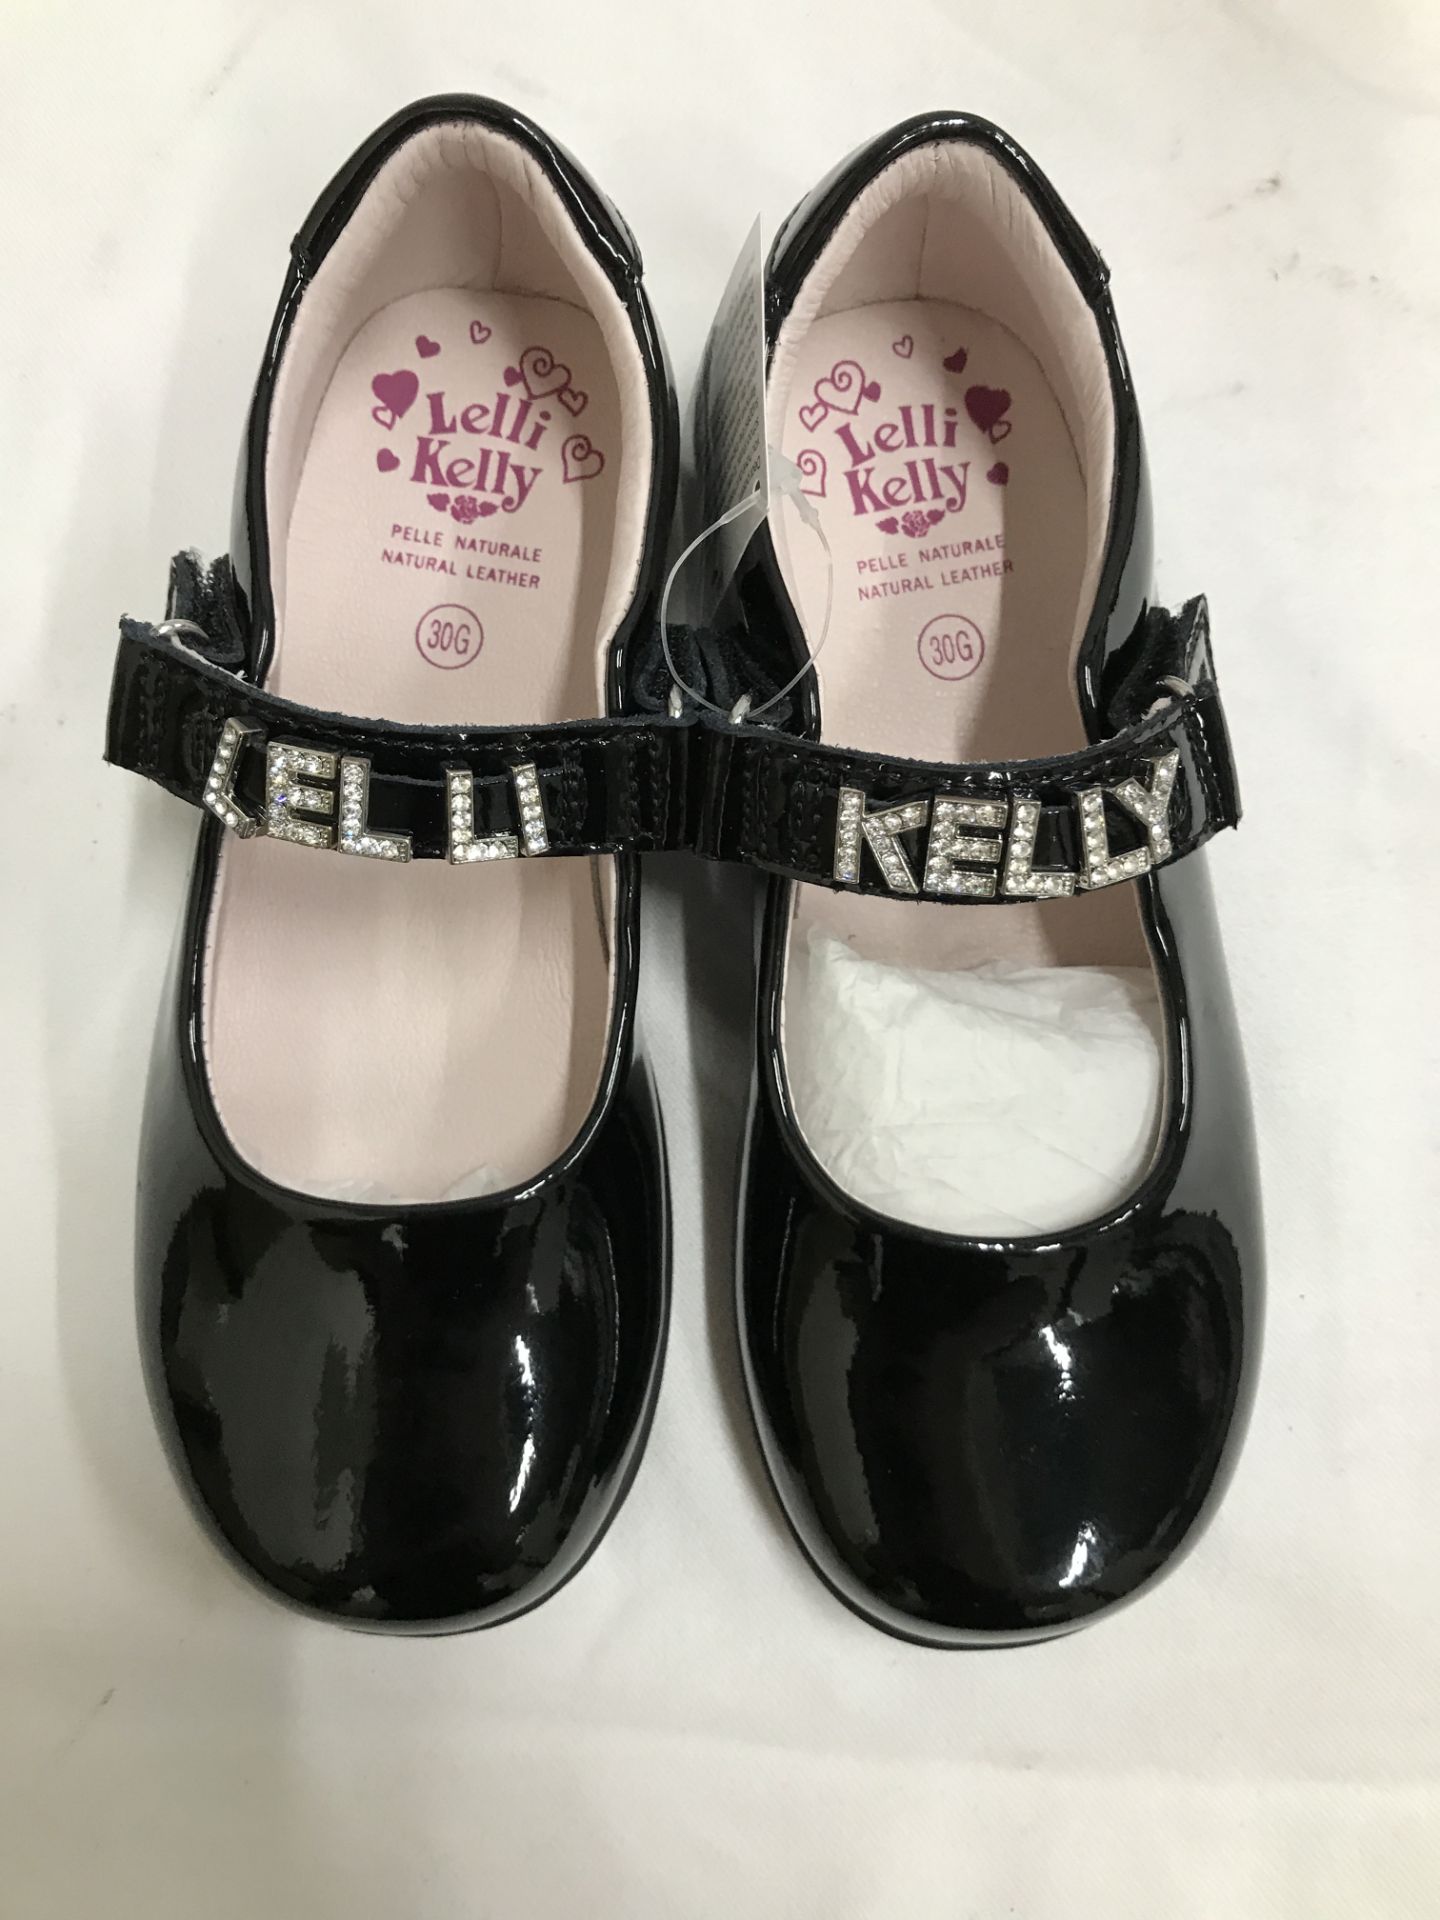 13 x Pairs of Lelli Kelly Children's Shoes - Various Designs - Size UK12.5 - Image 9 of 11